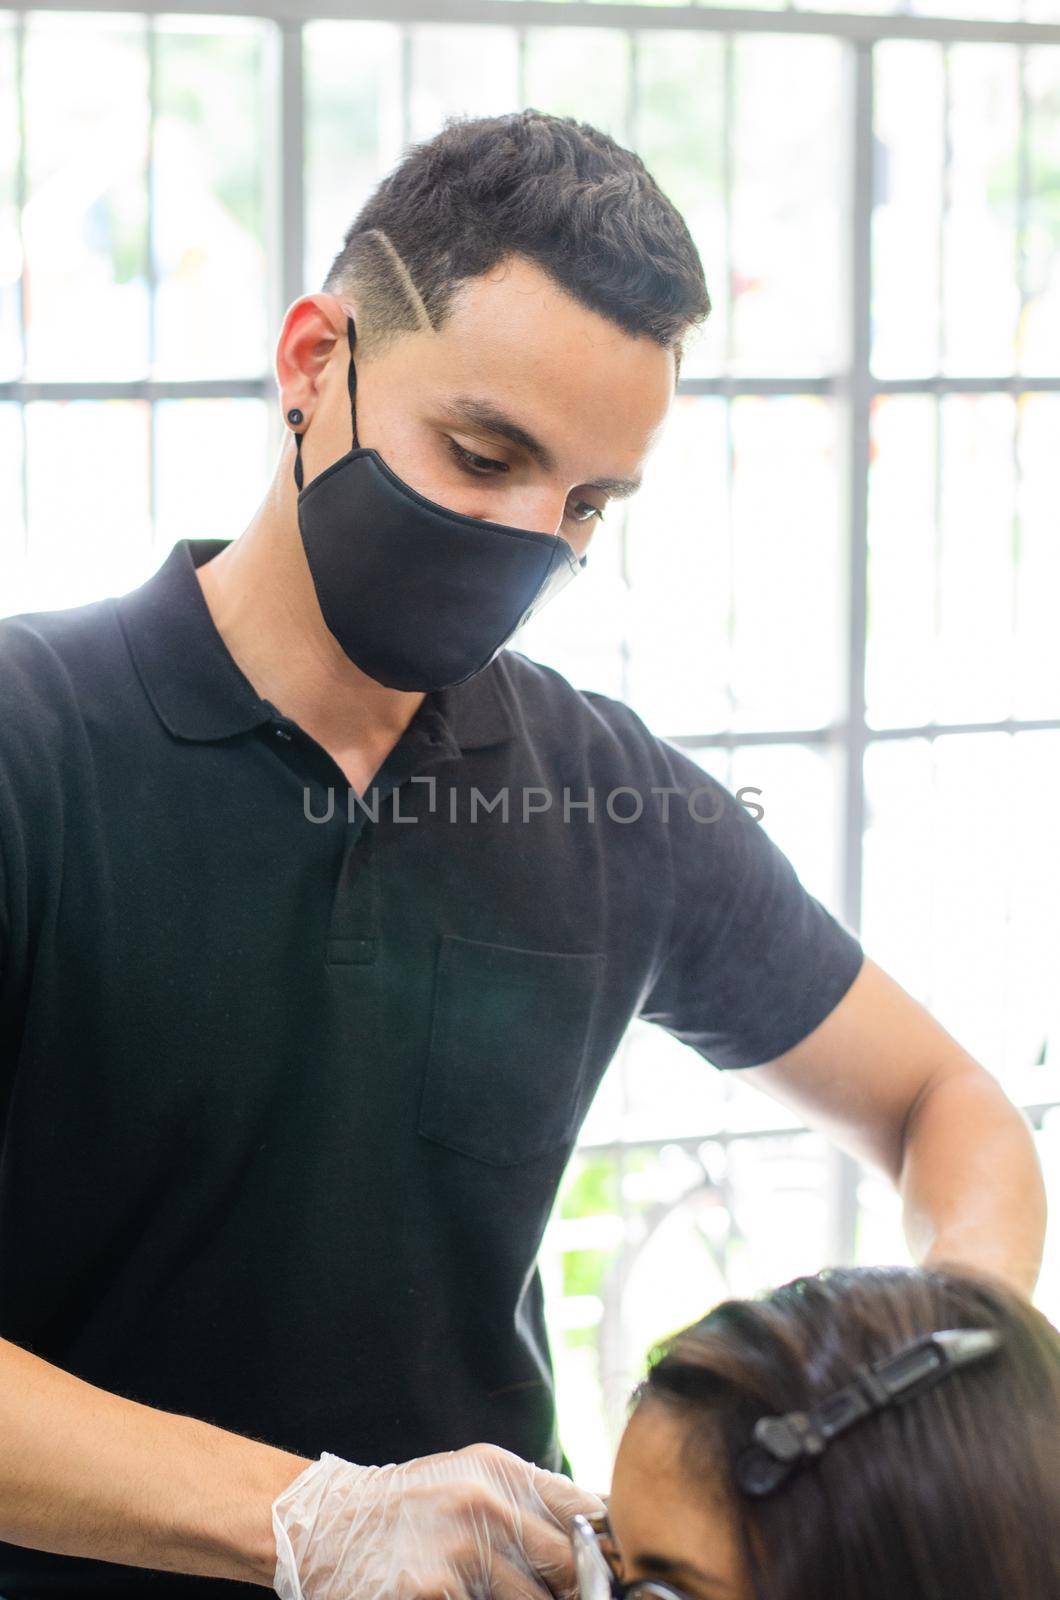 Young man and woman hairdressers in beauty salon